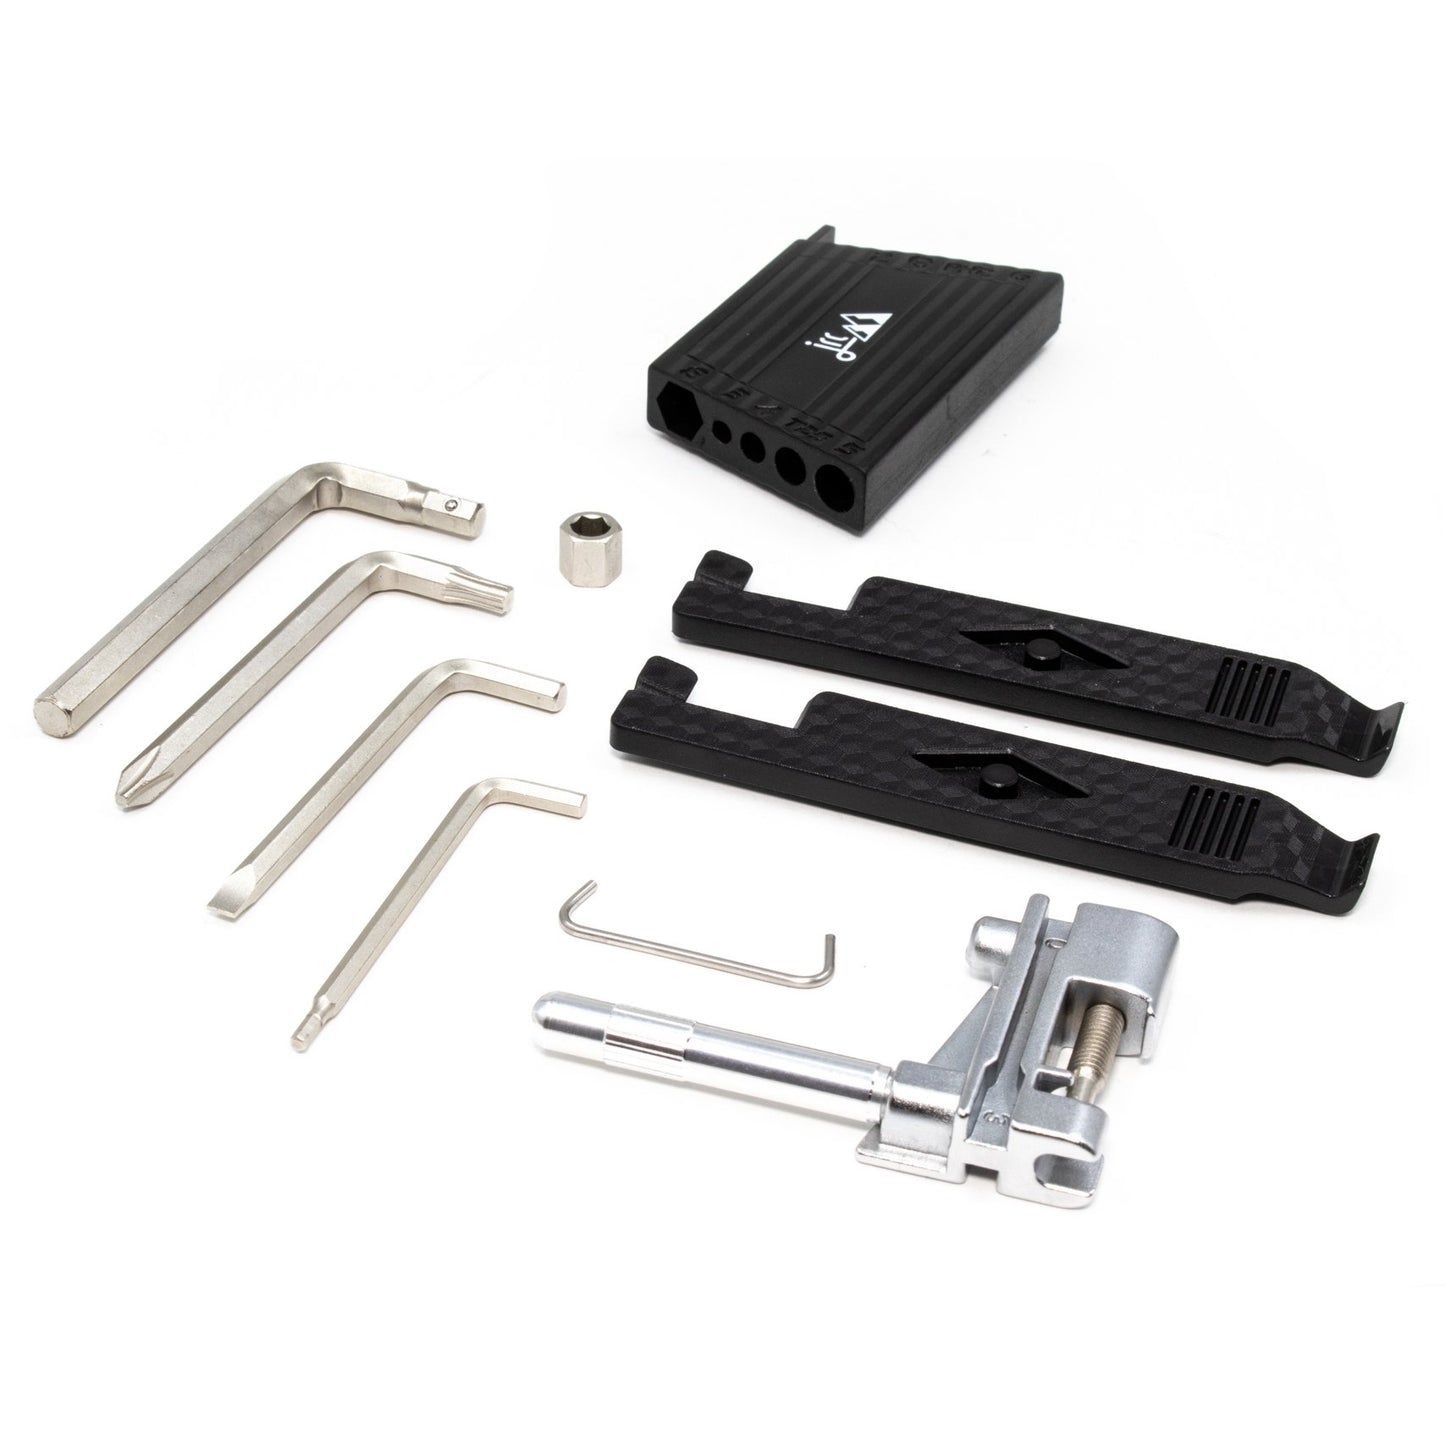 JRC Components Lightweight Bicycle Components Compact Flatpack Multi Tool Set 